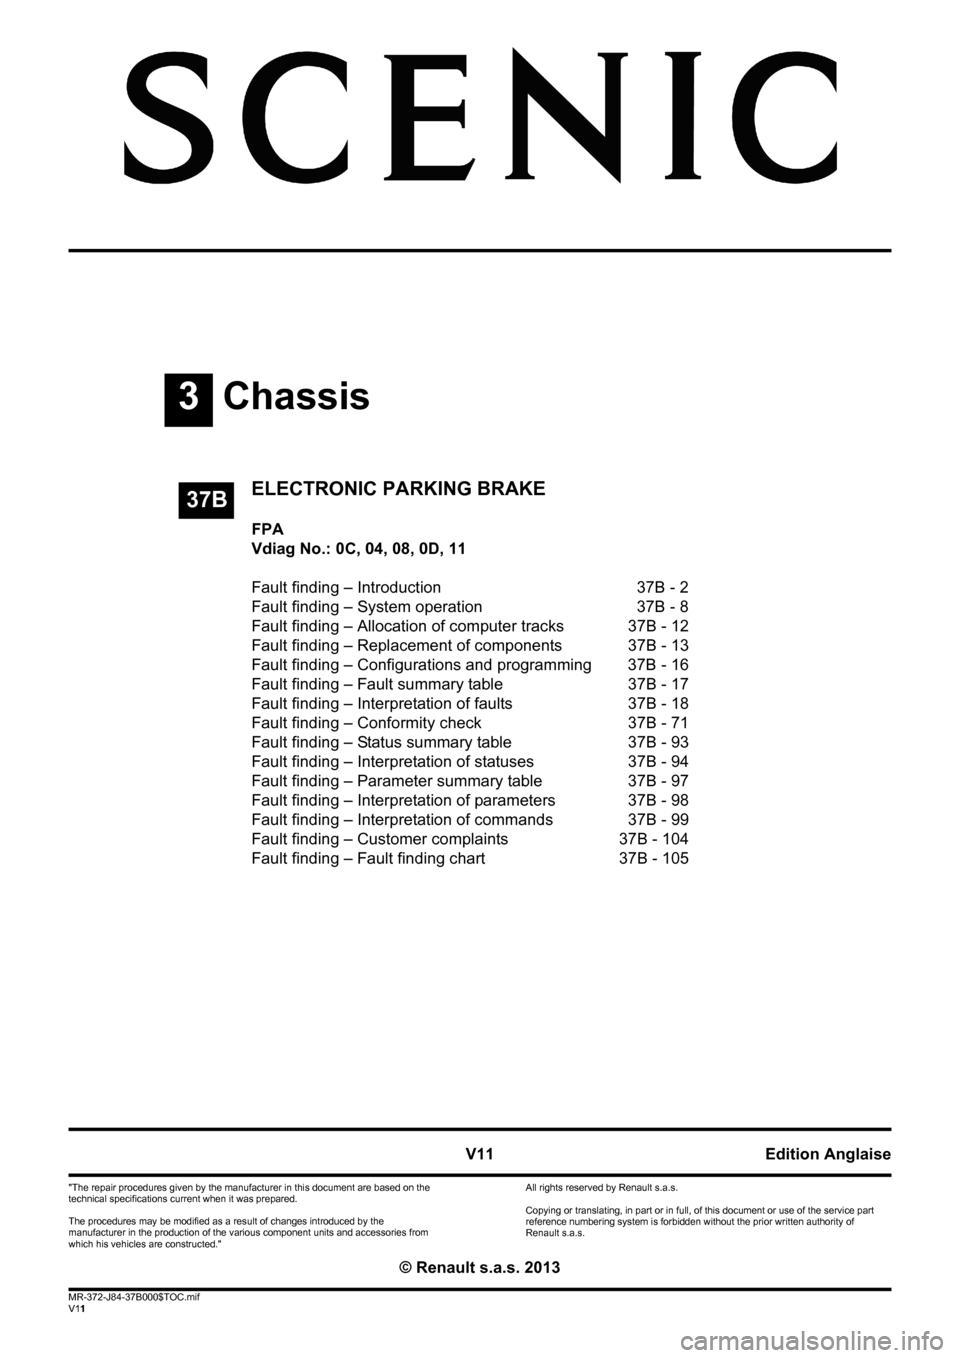 RENAULT SCENIC 2013 J95 / 3.G Electronic Parking Brake Workshop Manual 3Chassis
V11 MR-372-J84-37B000$TOC.mif
V11
37B
"The repair procedures given by the manufacturer in this document are based on the 
technical specifications current when it was prepared.
The procedures